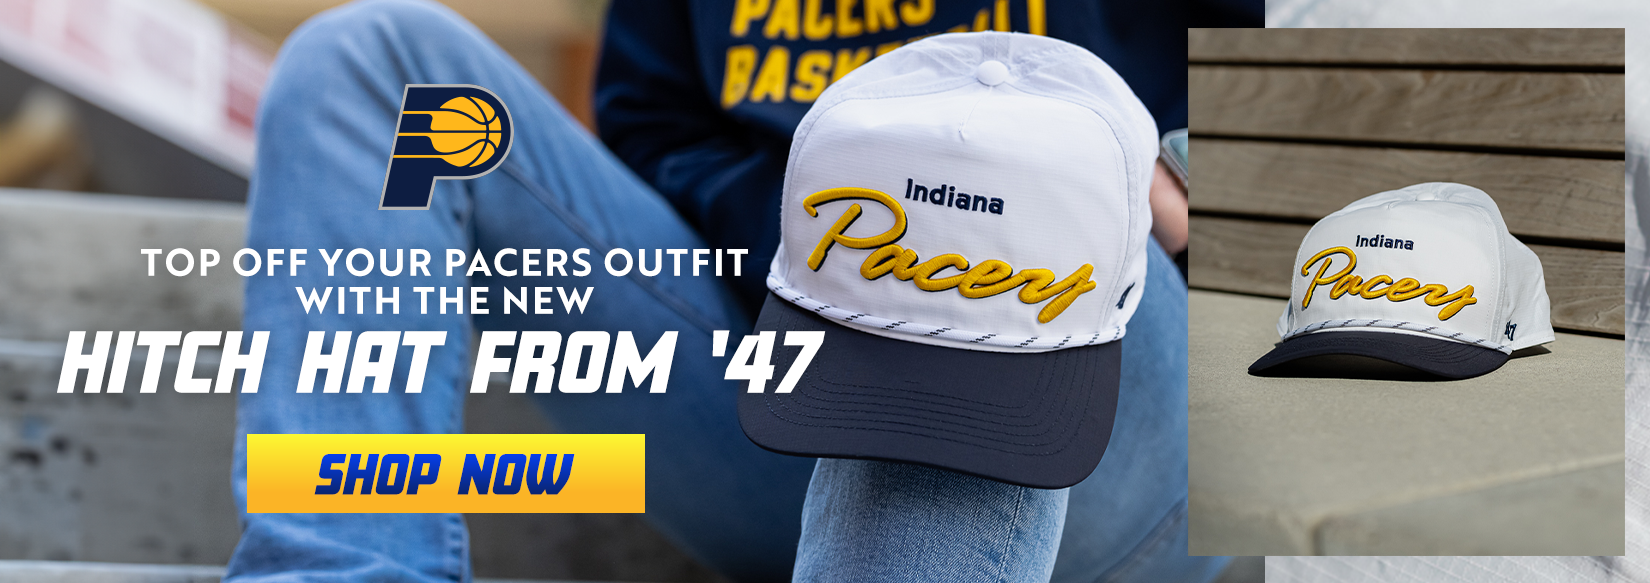 Indiana Pacers Home in Indiana Pacers Team Shop 